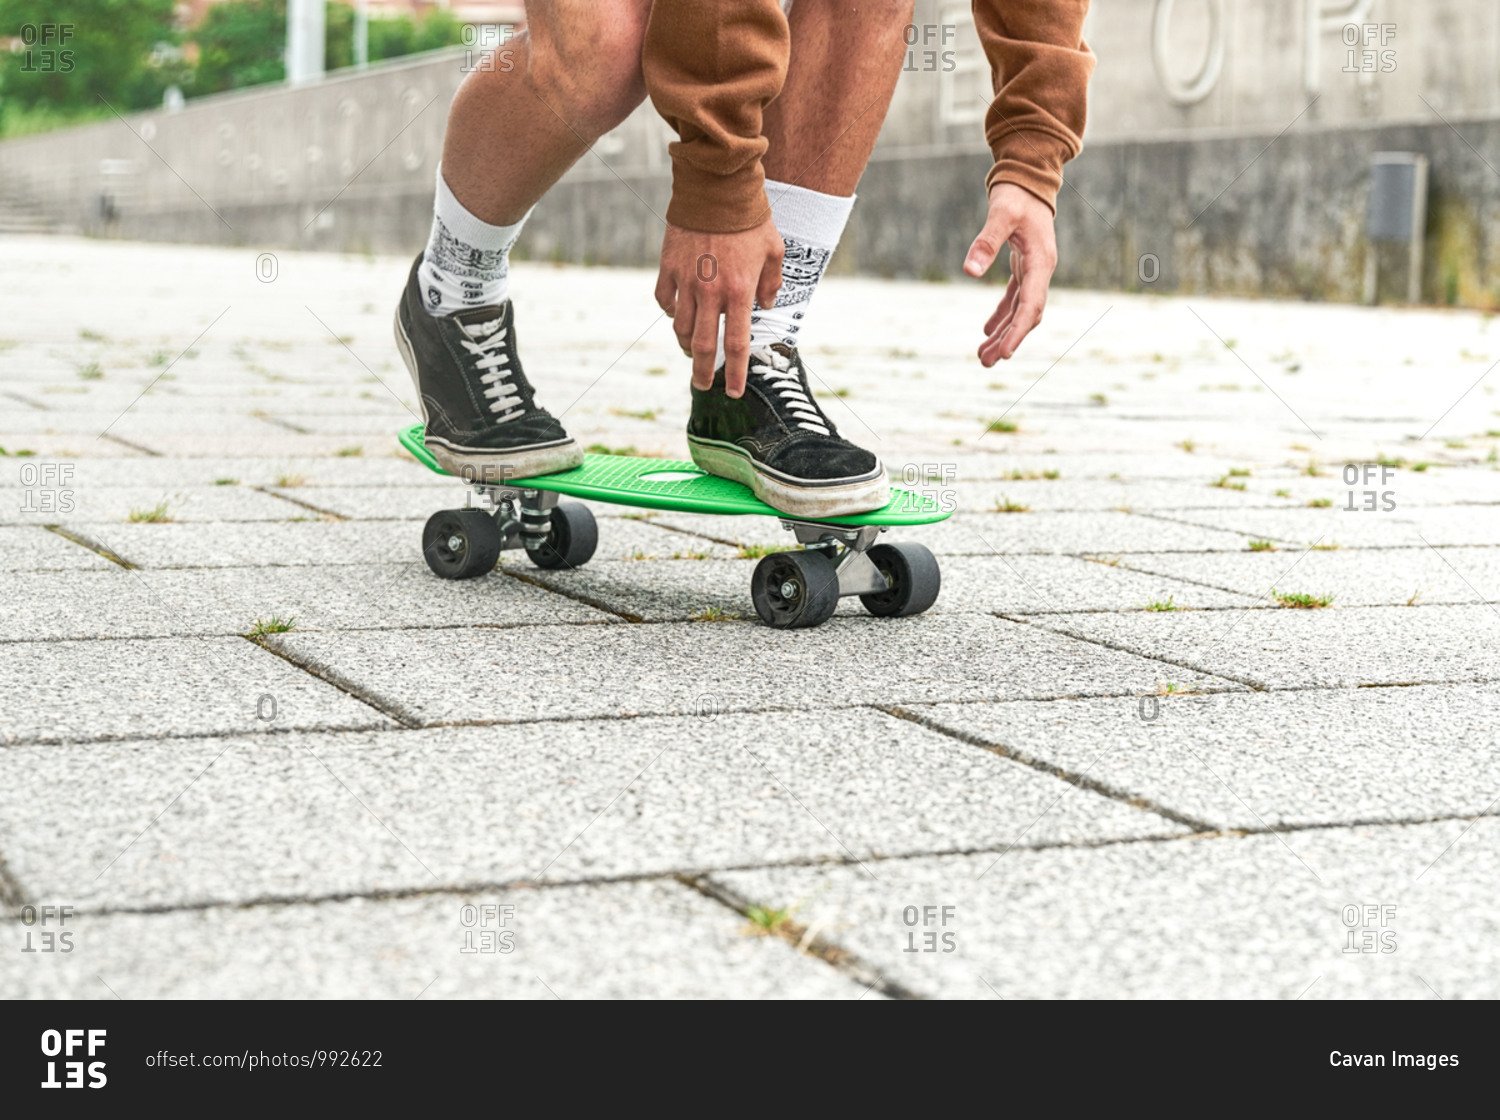 Close-up of Skateboarder doing a trick at the park. Concept of leisure activity, sport, extreme, hobby and motion.